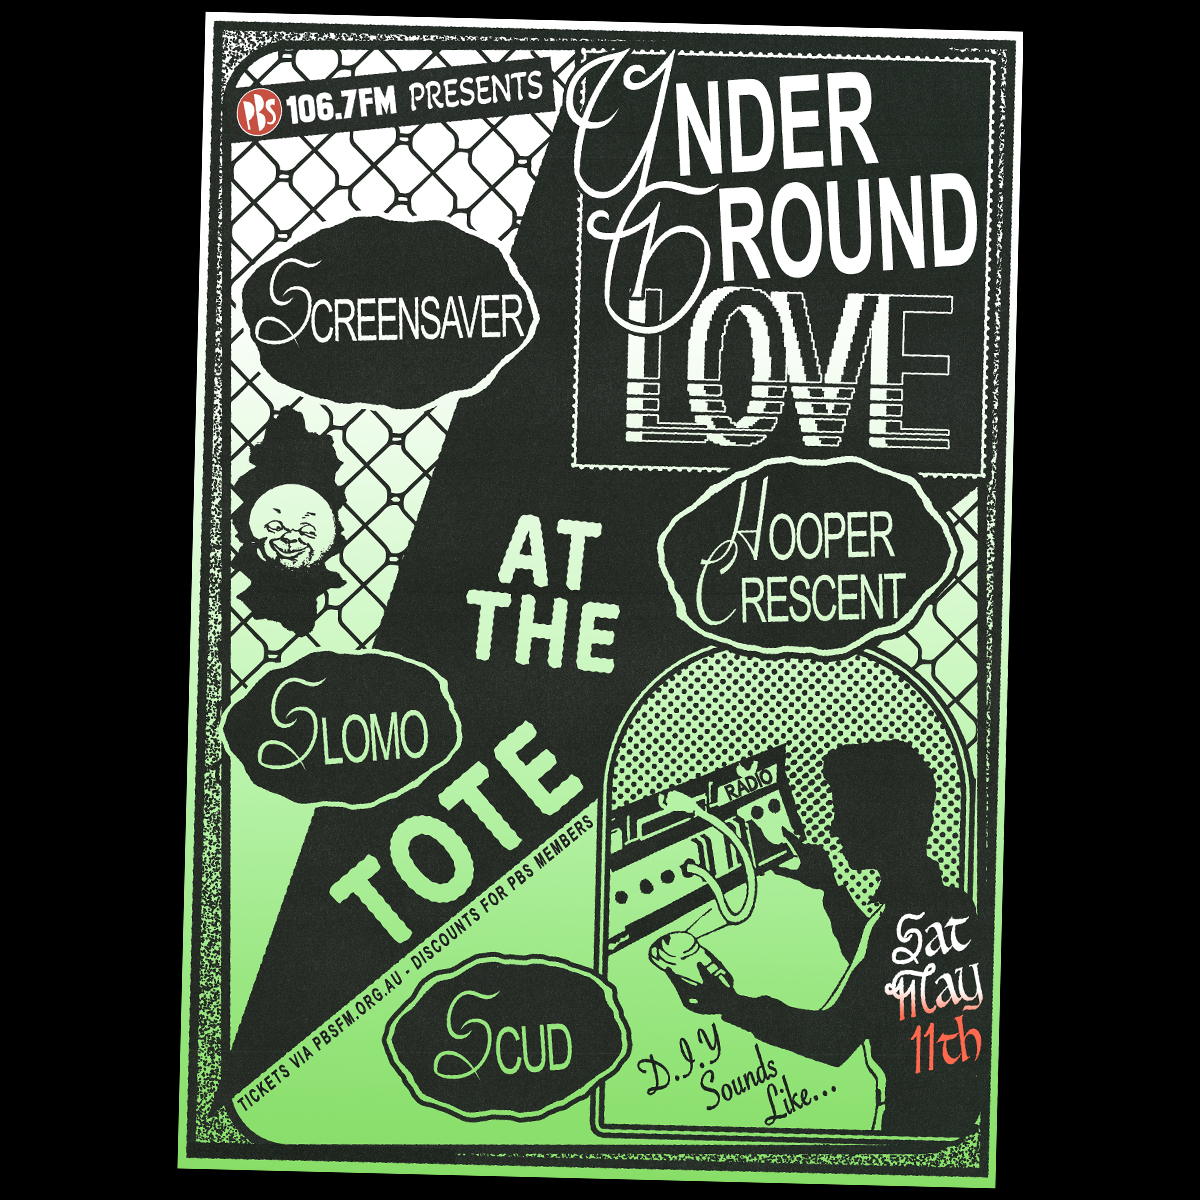 PBS is proud to present Underground Love at The Tote. Happening at The Tote on Saturday May 11, catch performances from; Screensaver, SLOMO, Hooper Crescent, and Scud. Head to the PBS website for tickets and further info: pbsfm.org.au/news/undergrou…